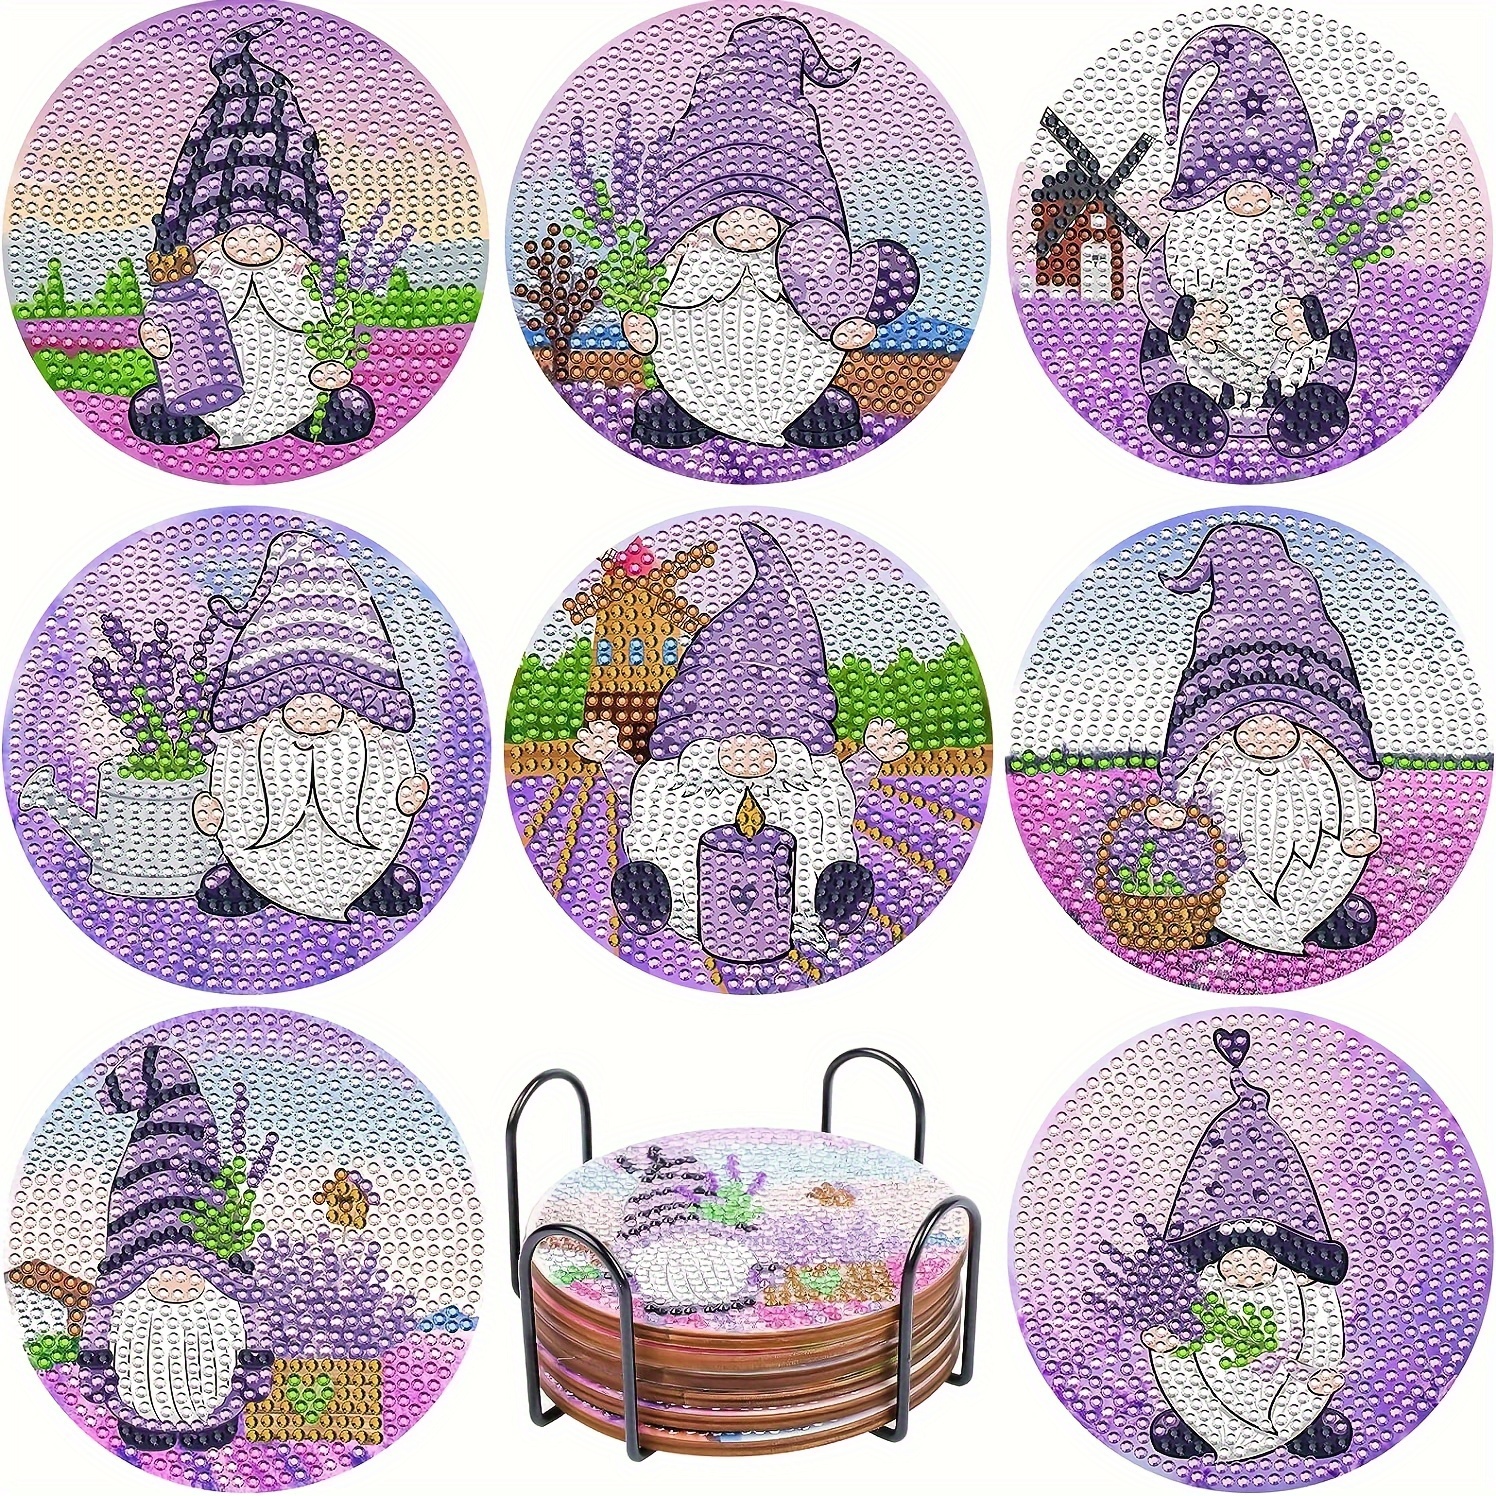 

8-piece Diy Diamond Painting Coaster Set With Stand, Round Gnome Design, Wooden Drink Mats For Beginners